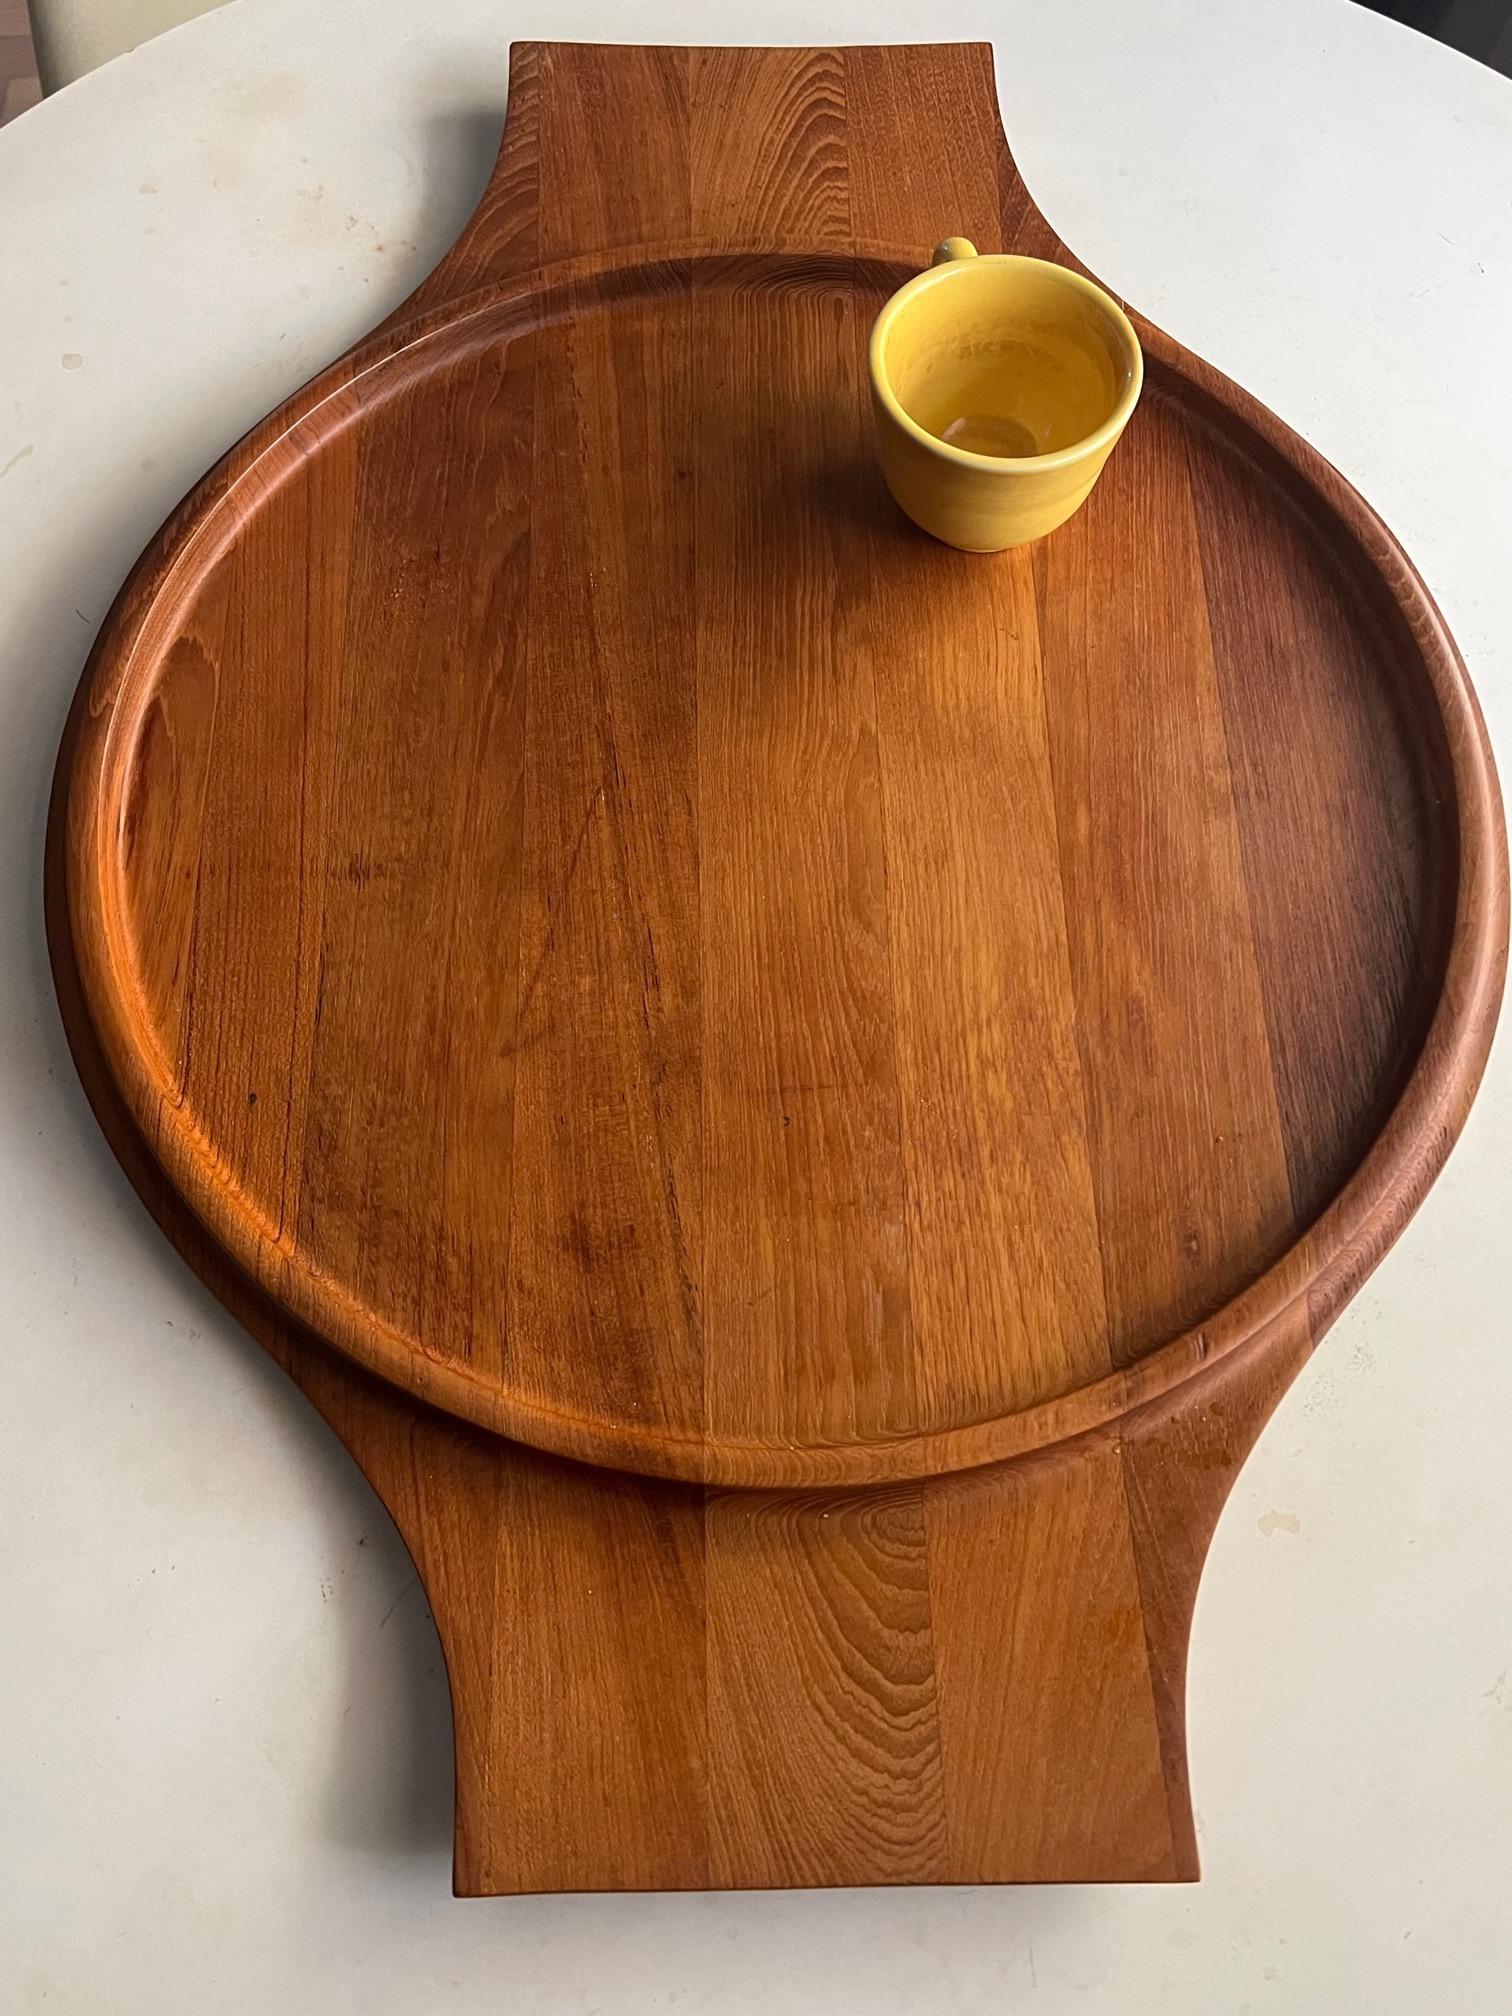 Beautiful serving teak tray by Jens Quistgaard for Dansk, ca' 1960's. This is an extra large-hard to find version at 26